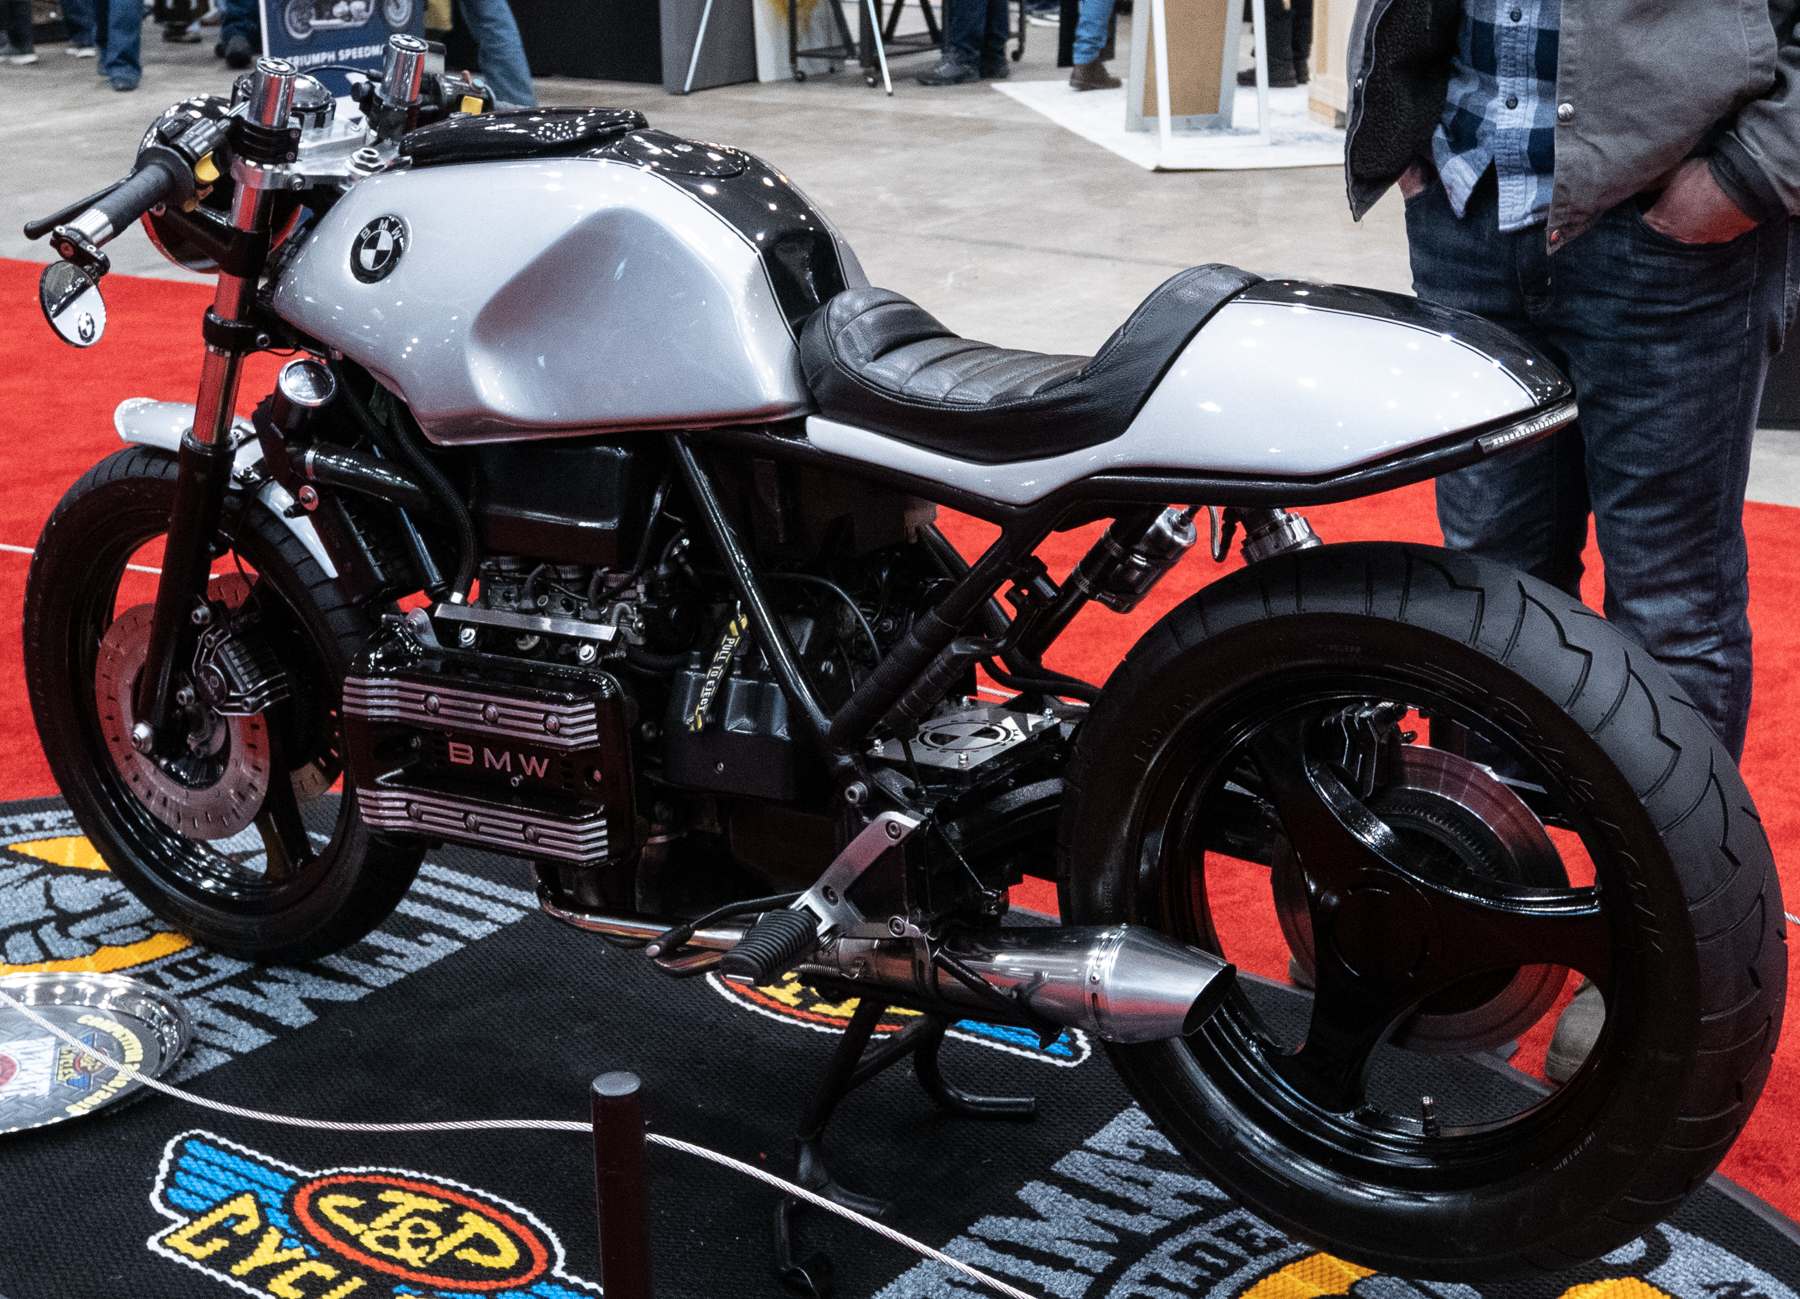 cleveland motorcycle show6 International Motorcycle Shows 2019 in Cleveland